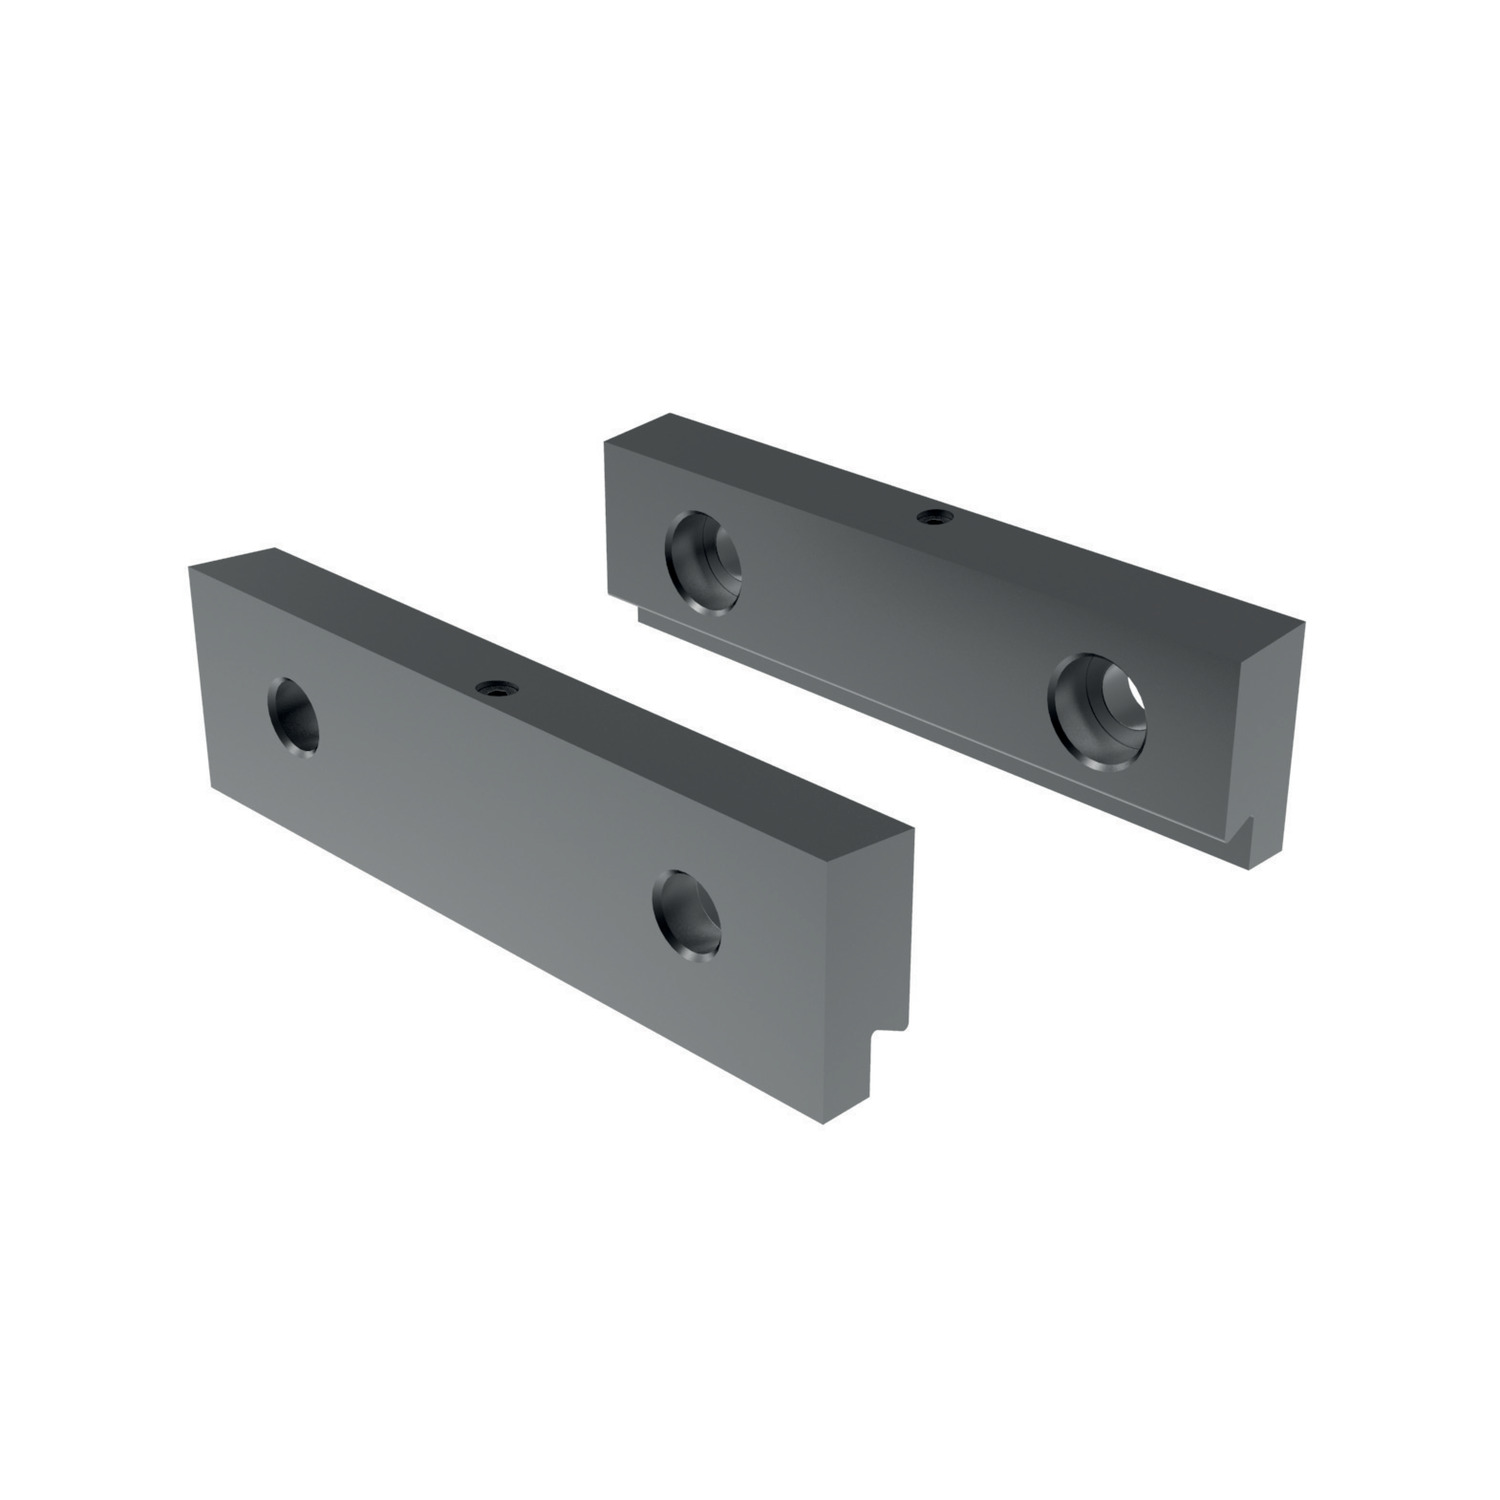 Vice Jaws & Parallels - Universal These mater jaws enable our relock vice snap lock carrier jaws to accept all quick change jaw components, providing complete flexibility.